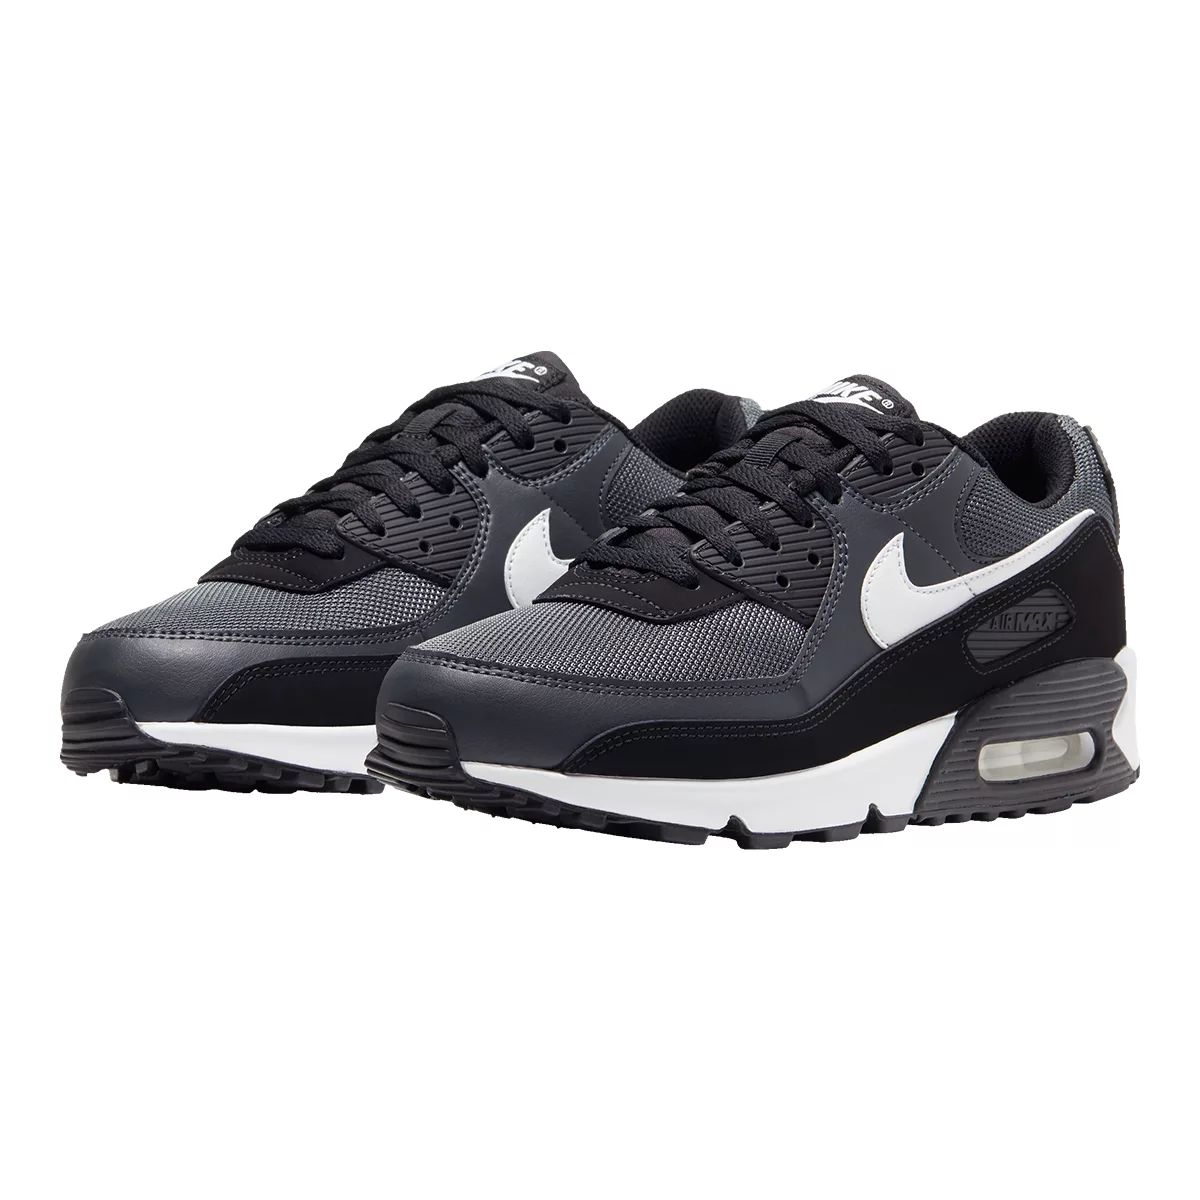 Nike Men's Air Max 90 Shoes, Sneakers, Low Top, Cushioned | Sportchek